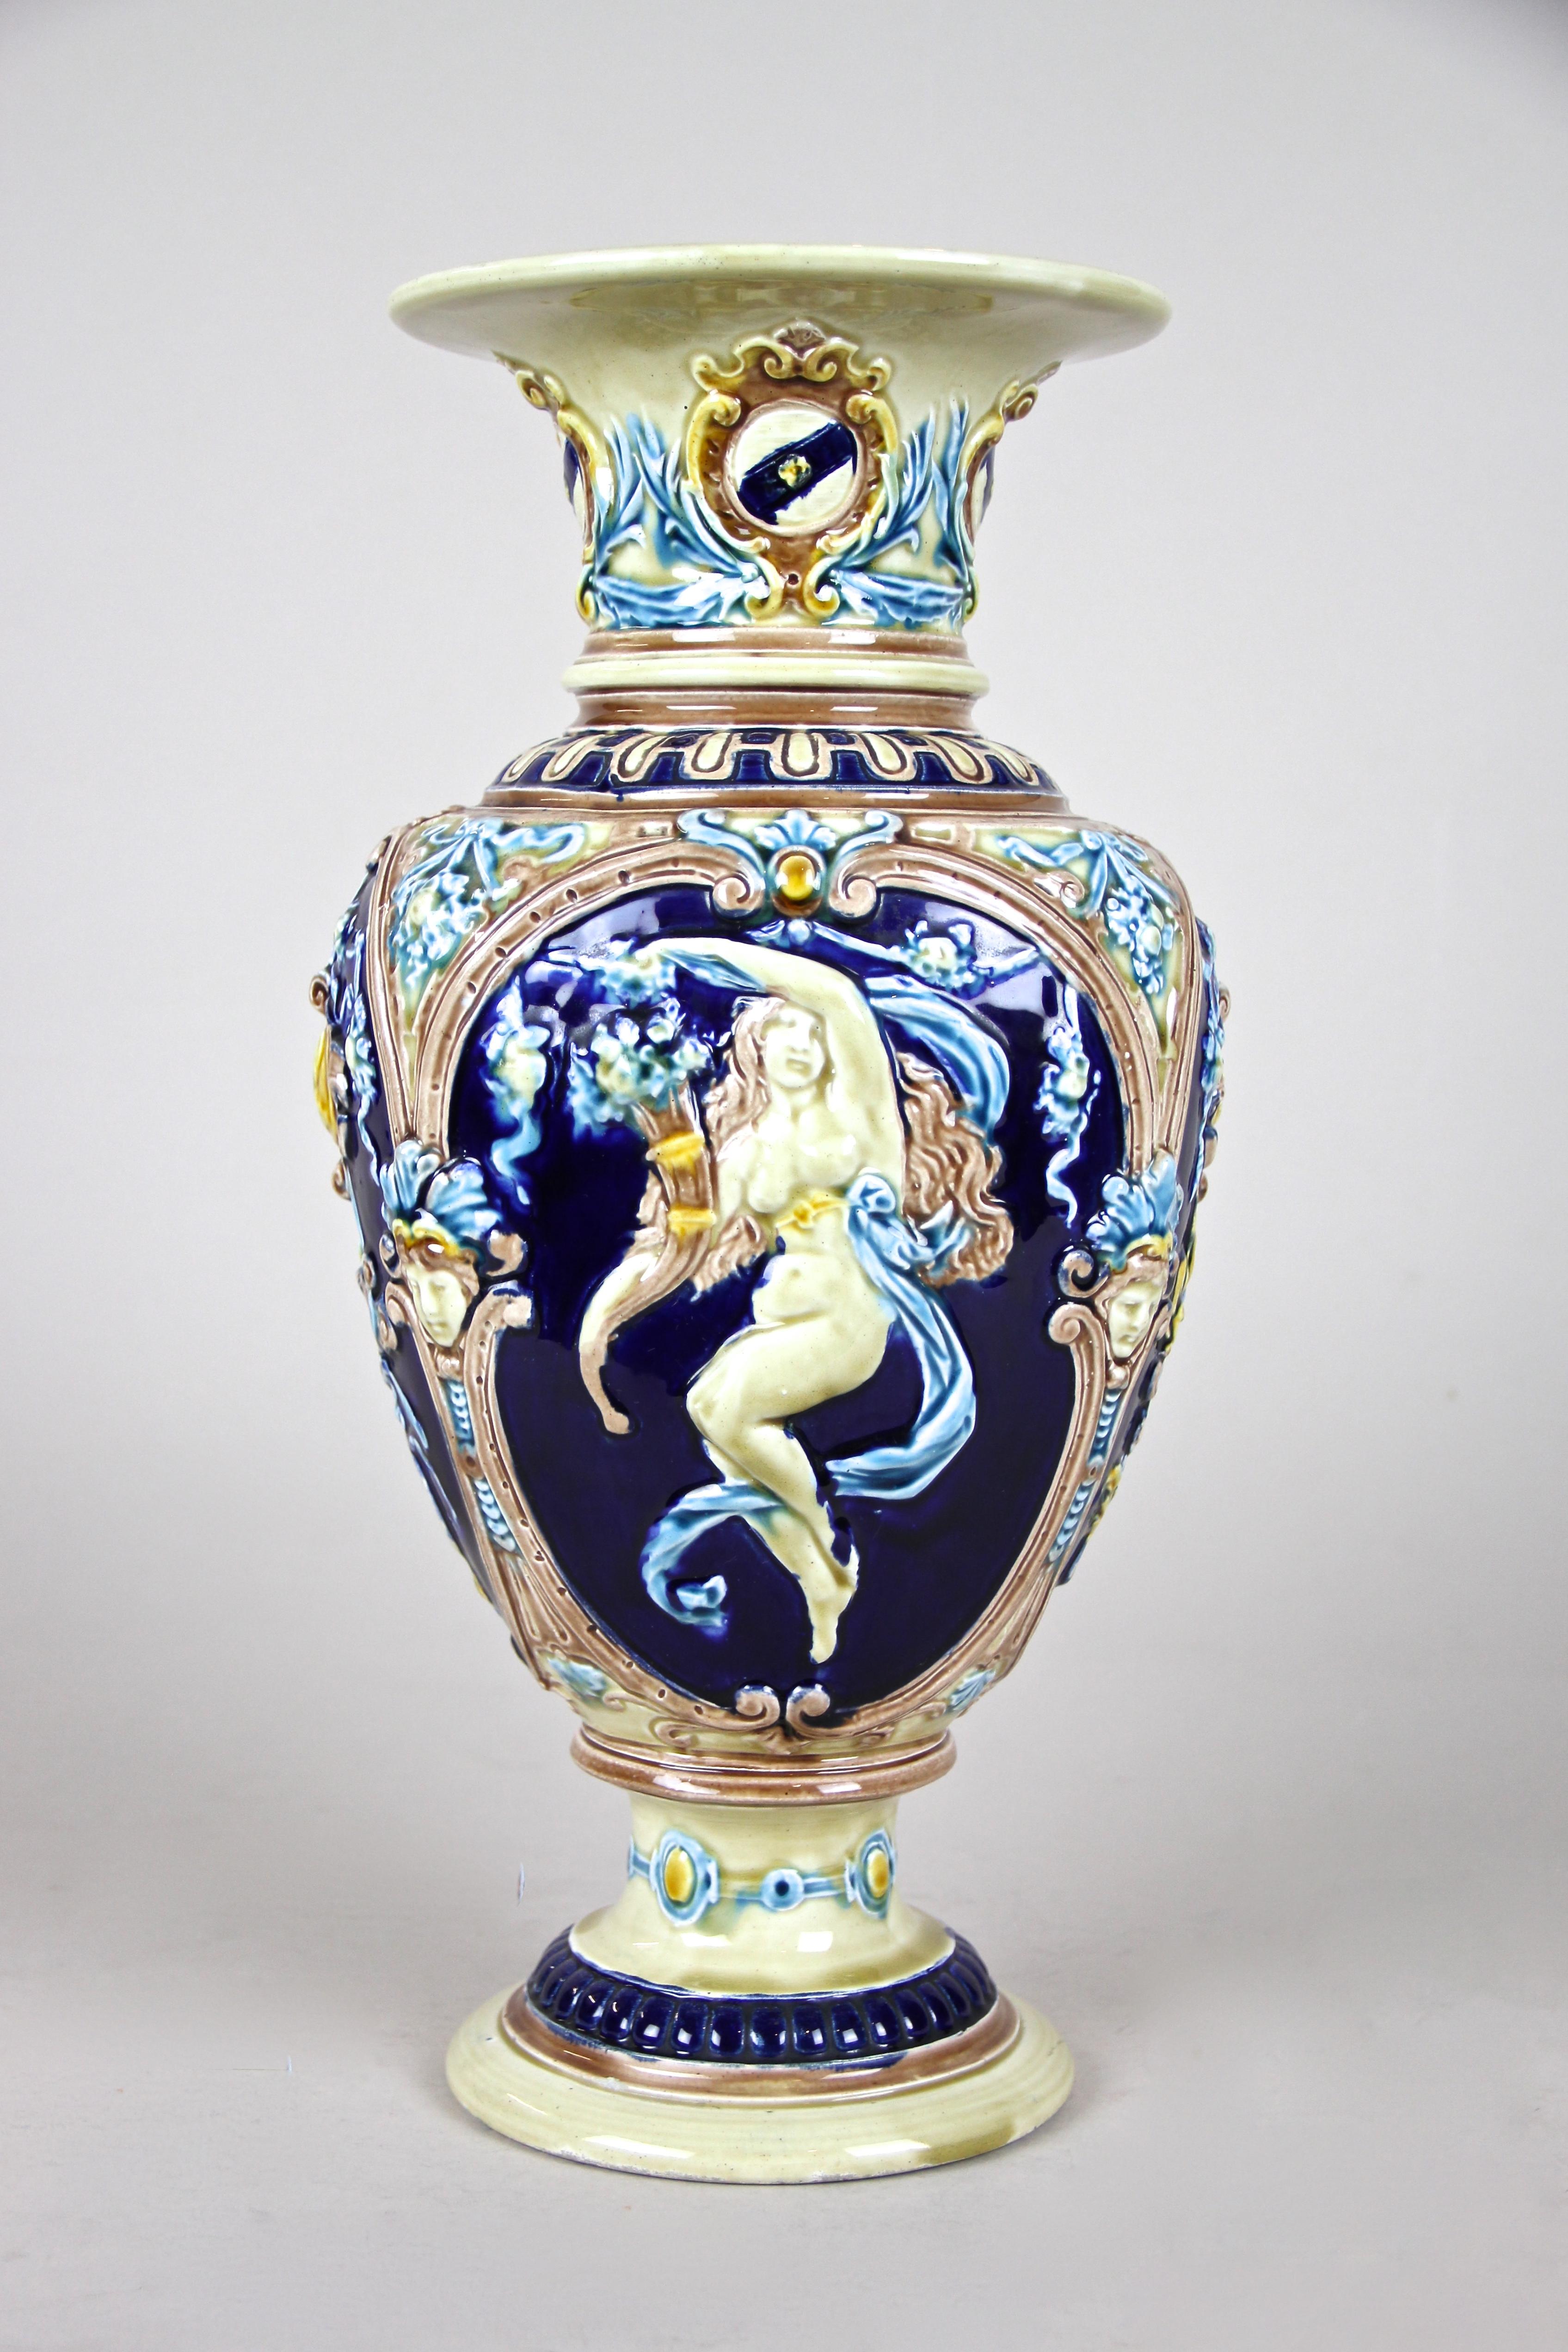 Lovely Art Nouveau Majolica Amphora vase out of the renown manufactory of Schuetz Cilli in Slovenia circa 1900. This colorful Majolica masterpiece impresses with a unique shape and beautiful design. The bulbous body depicts beautiful women with long